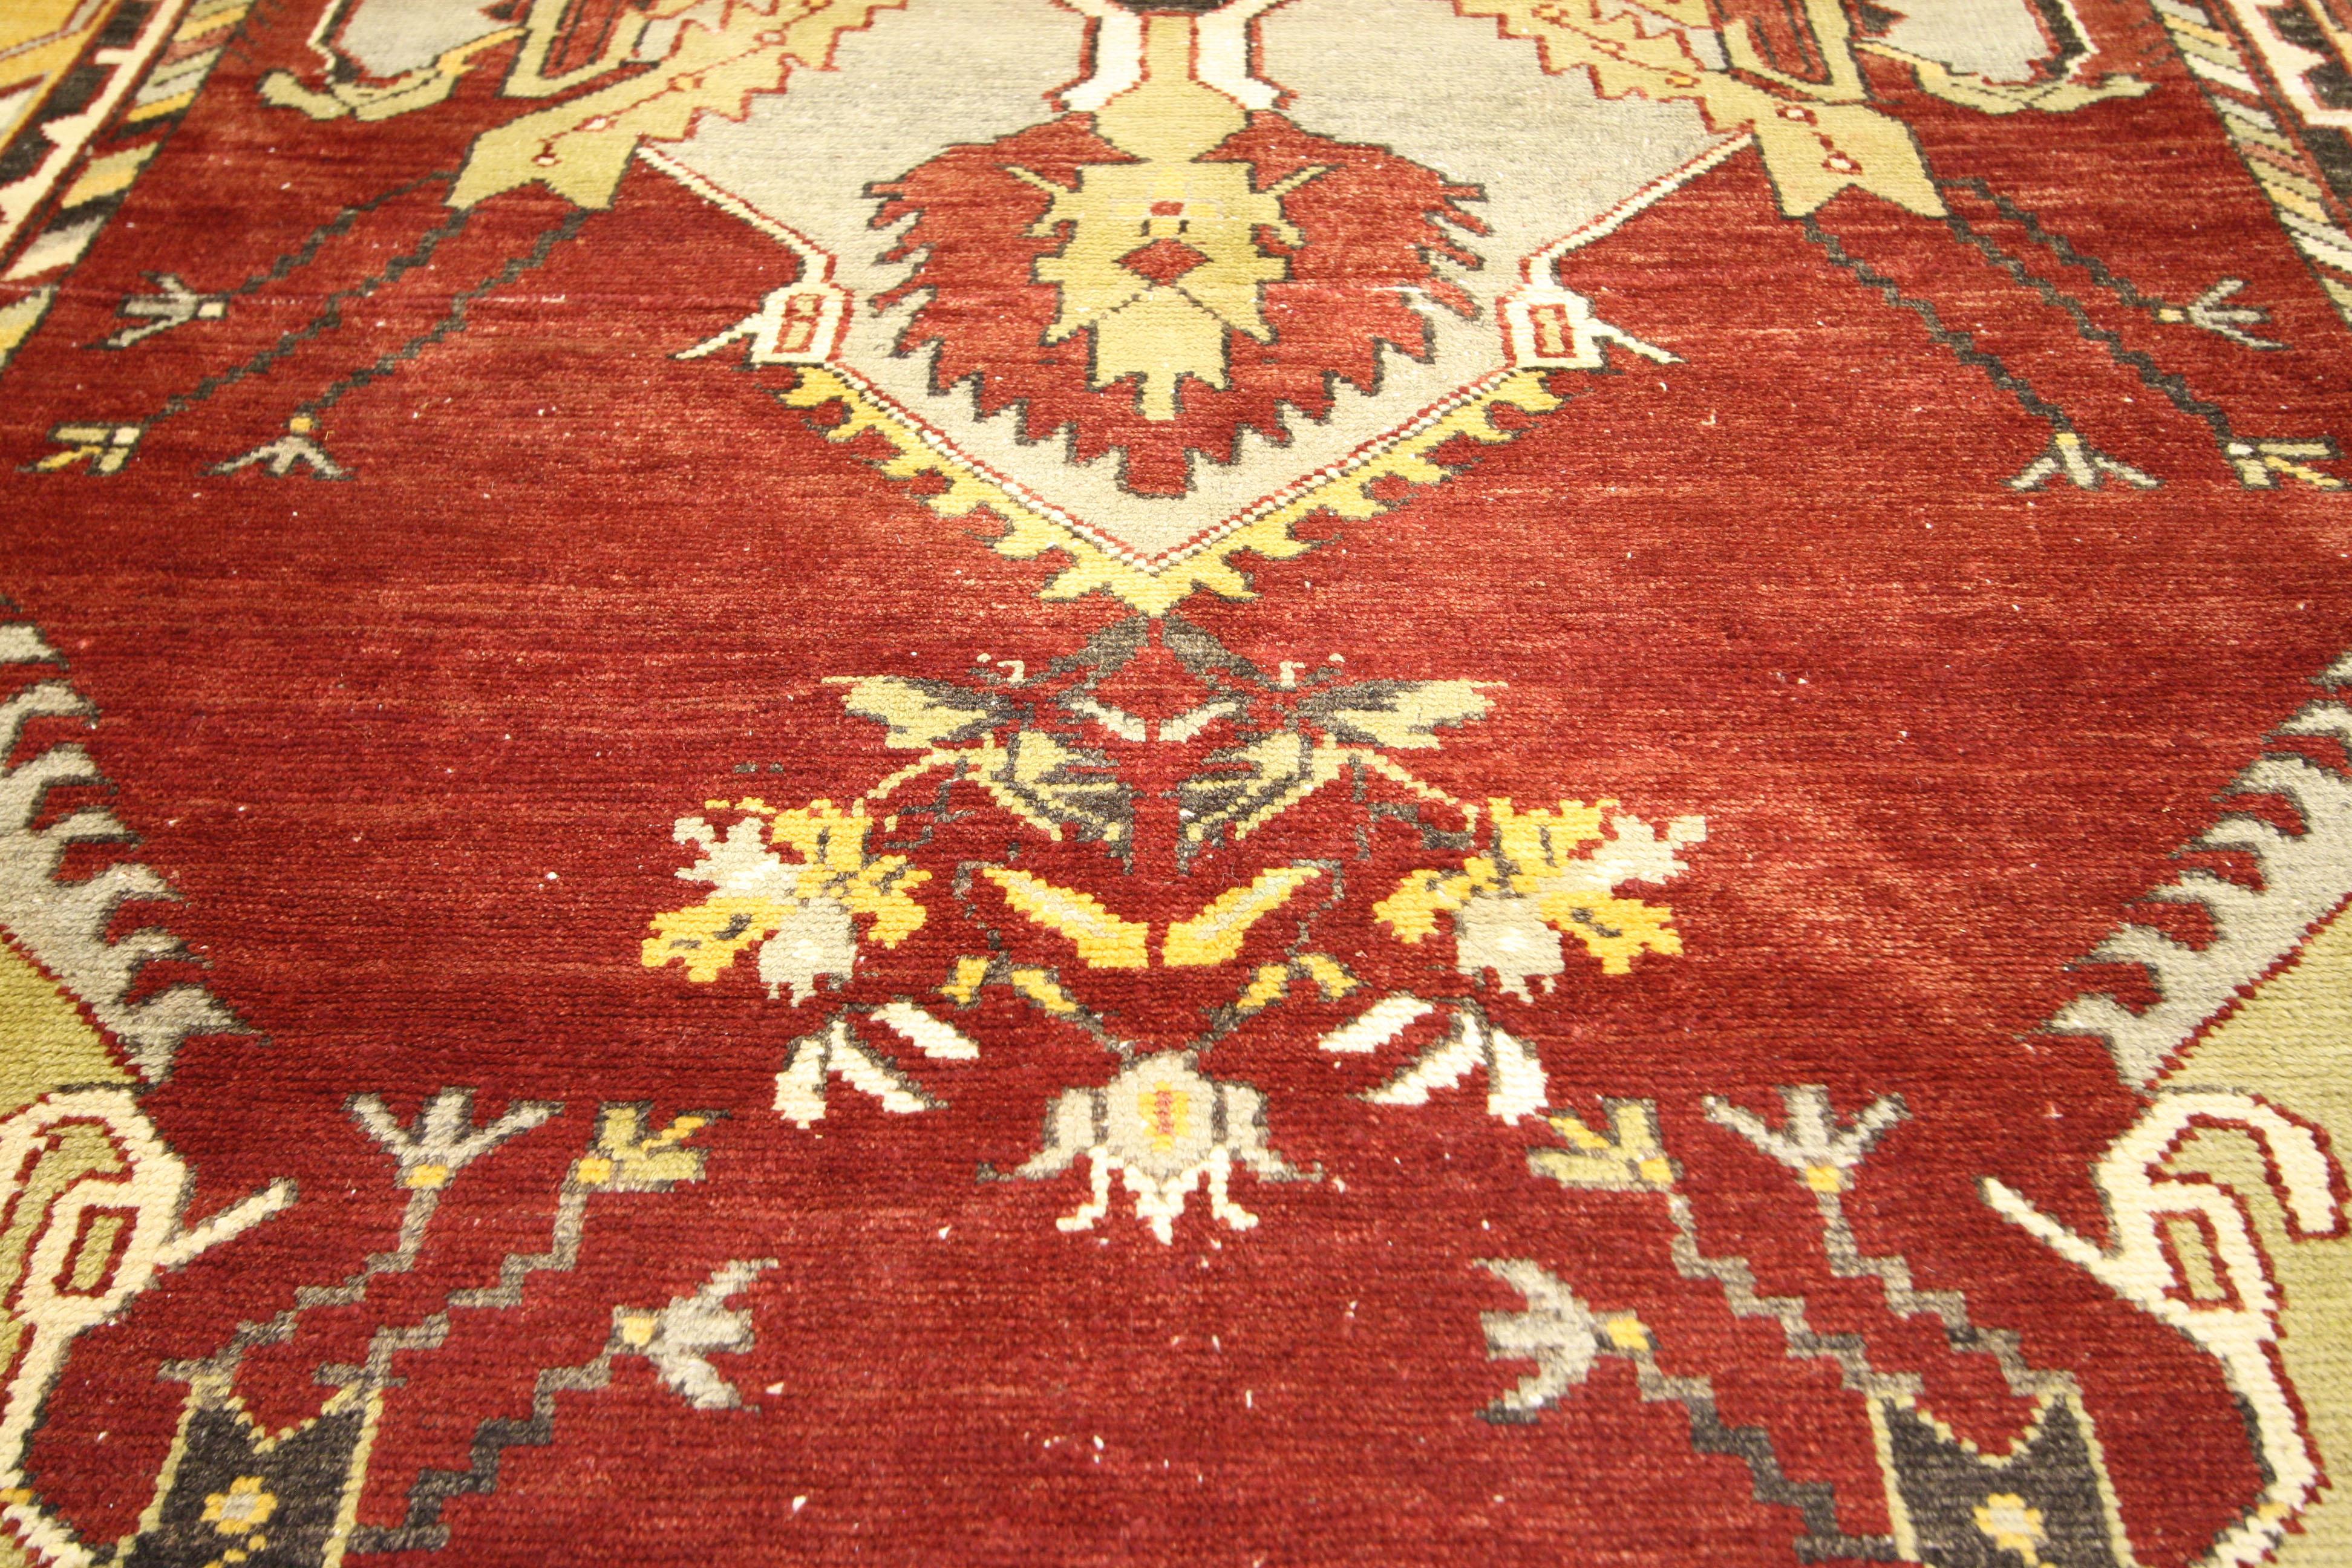 Vintage Turkish Oushak Gallery Rug, Hallway Runner with English Tudor Style In Good Condition For Sale In Dallas, TX